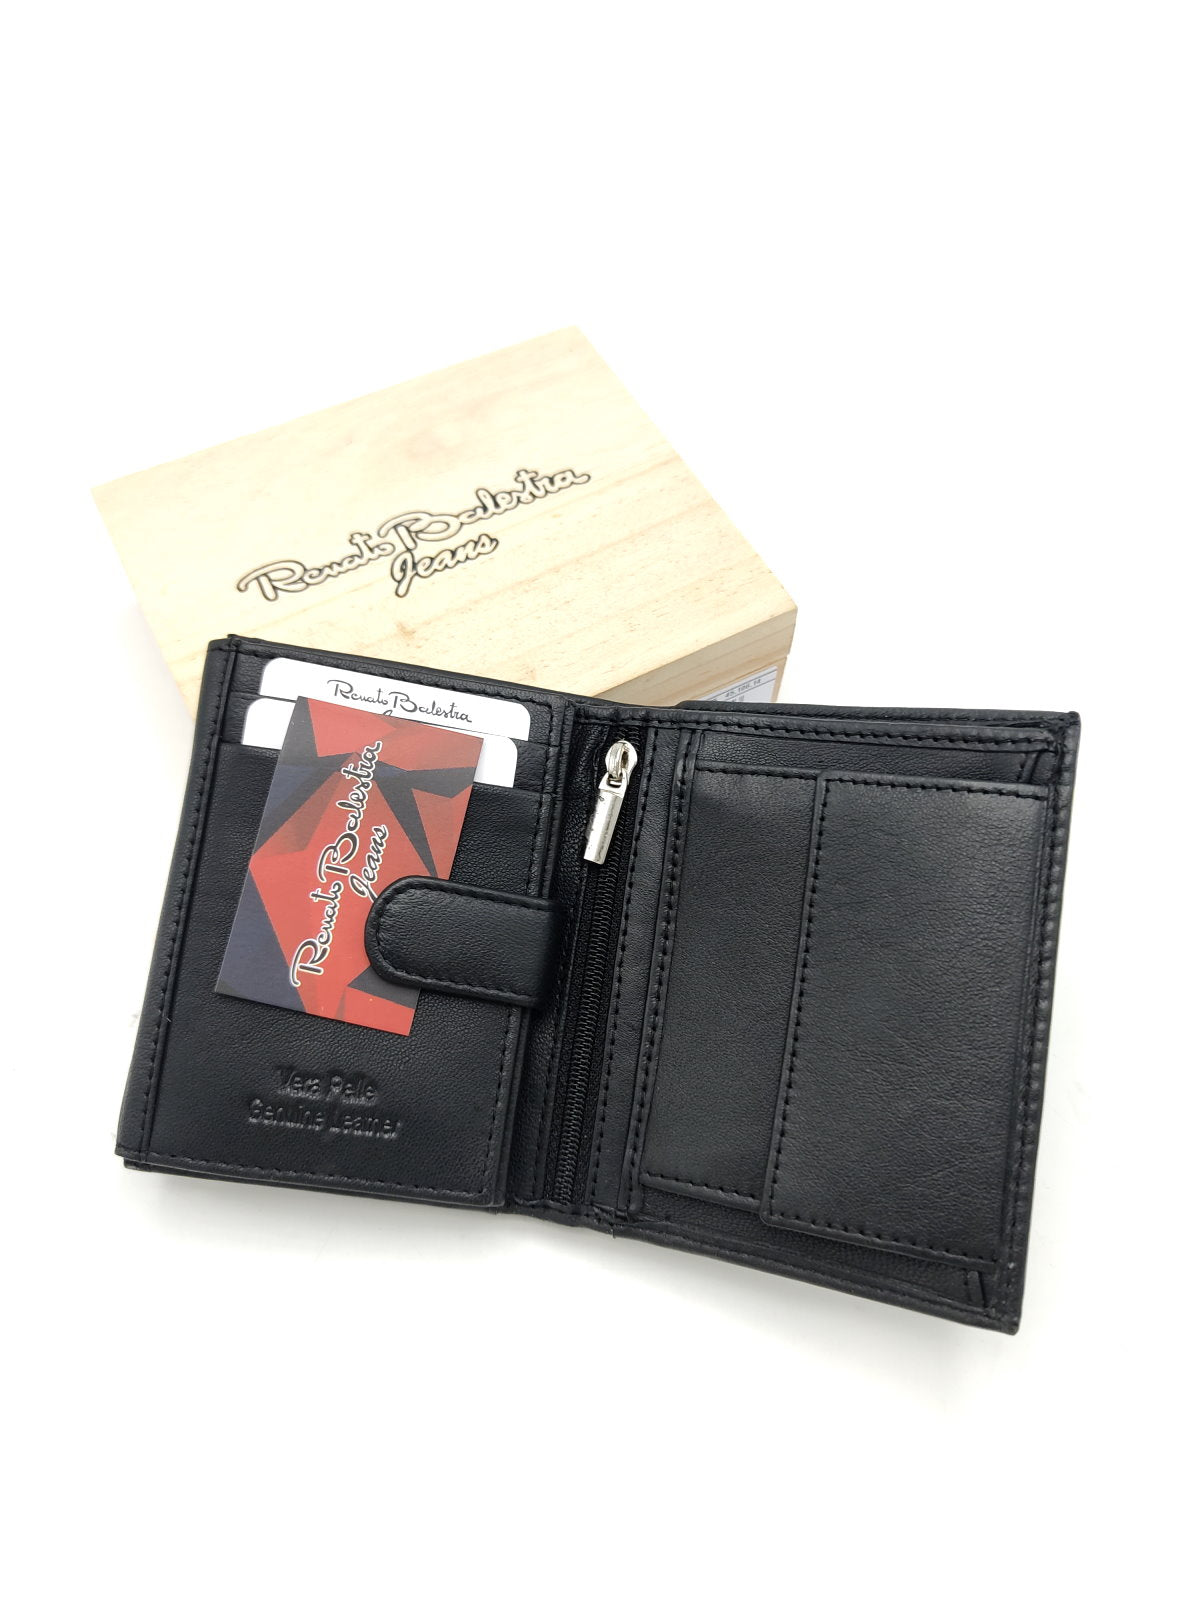 Genuine leather wallet for Men, Brand Renato Balestra Jeans, with wooden box, art. PDK161-65.425